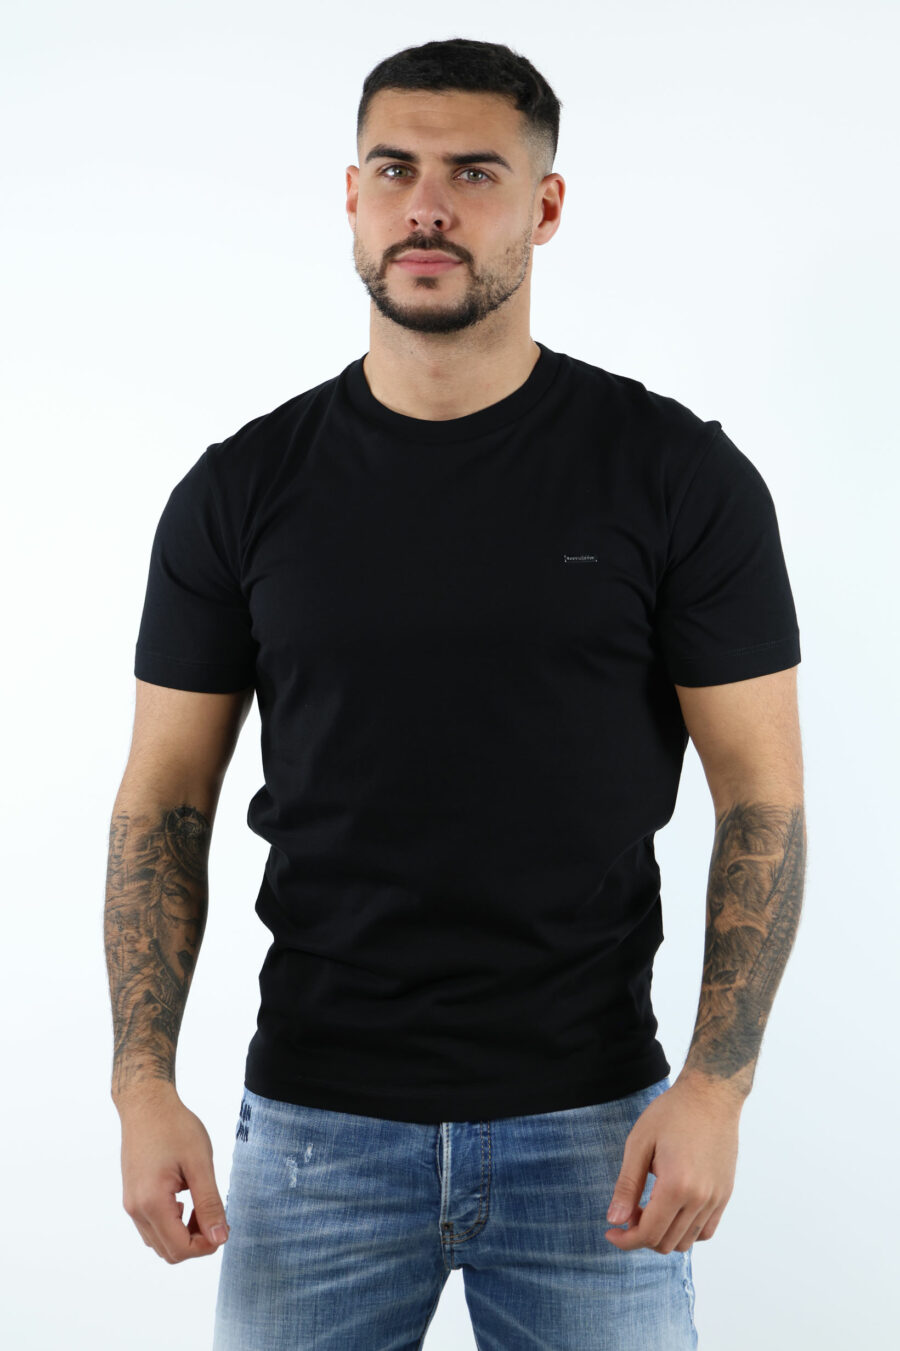 T-shirt black with logo on small plate - 106899